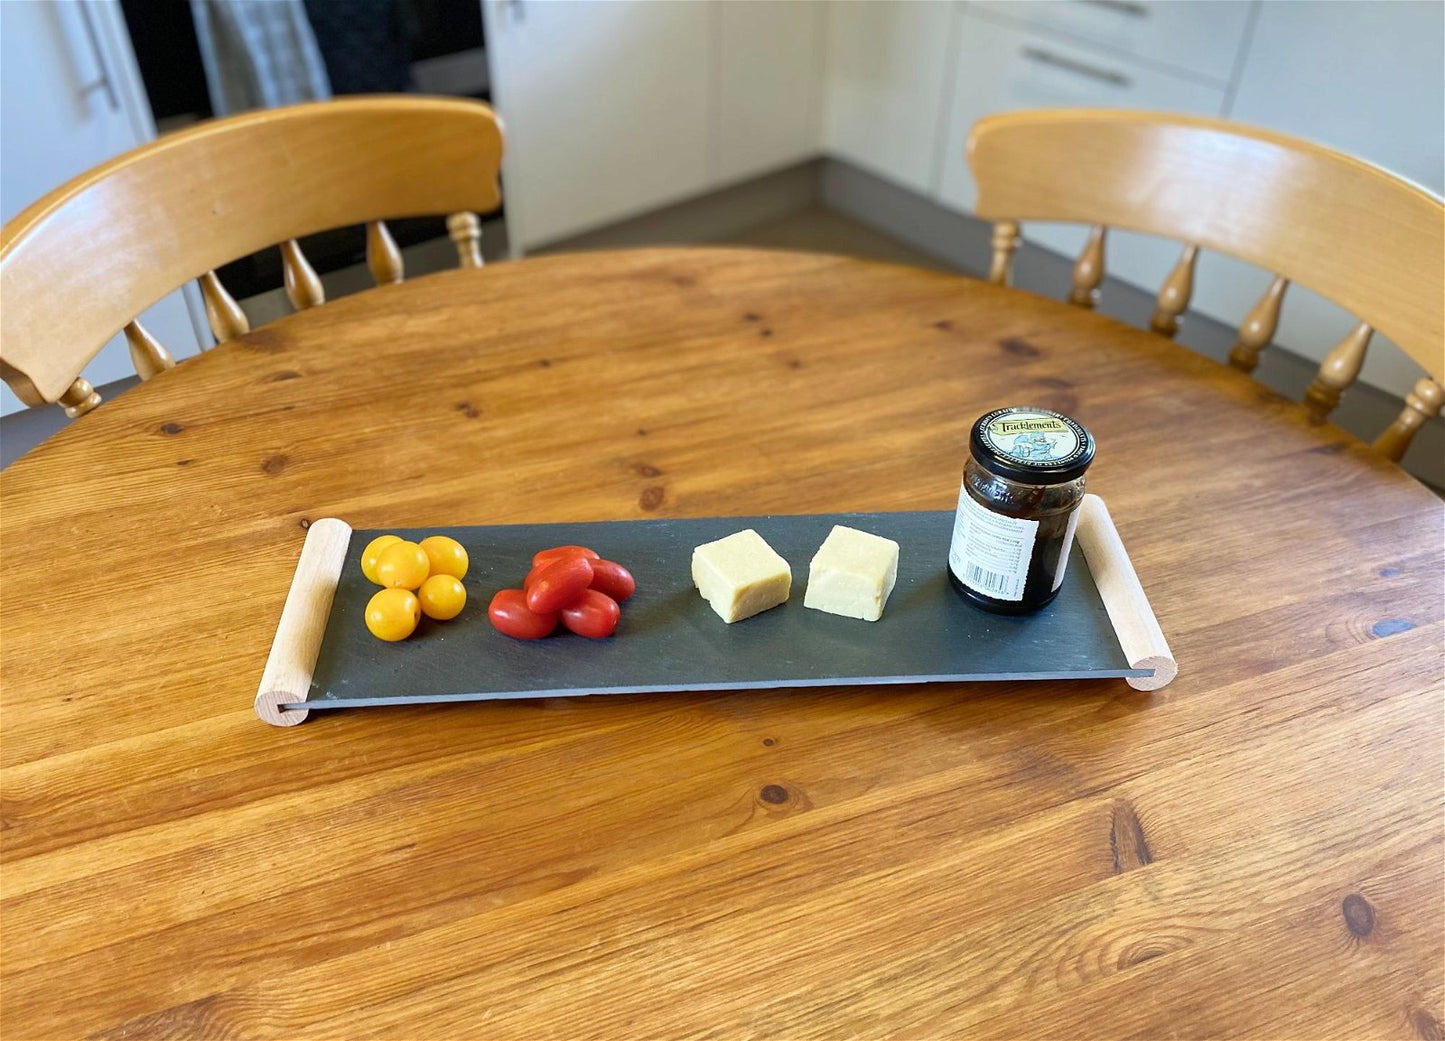 Slate Tray With Rounded Wood Handle 53cm